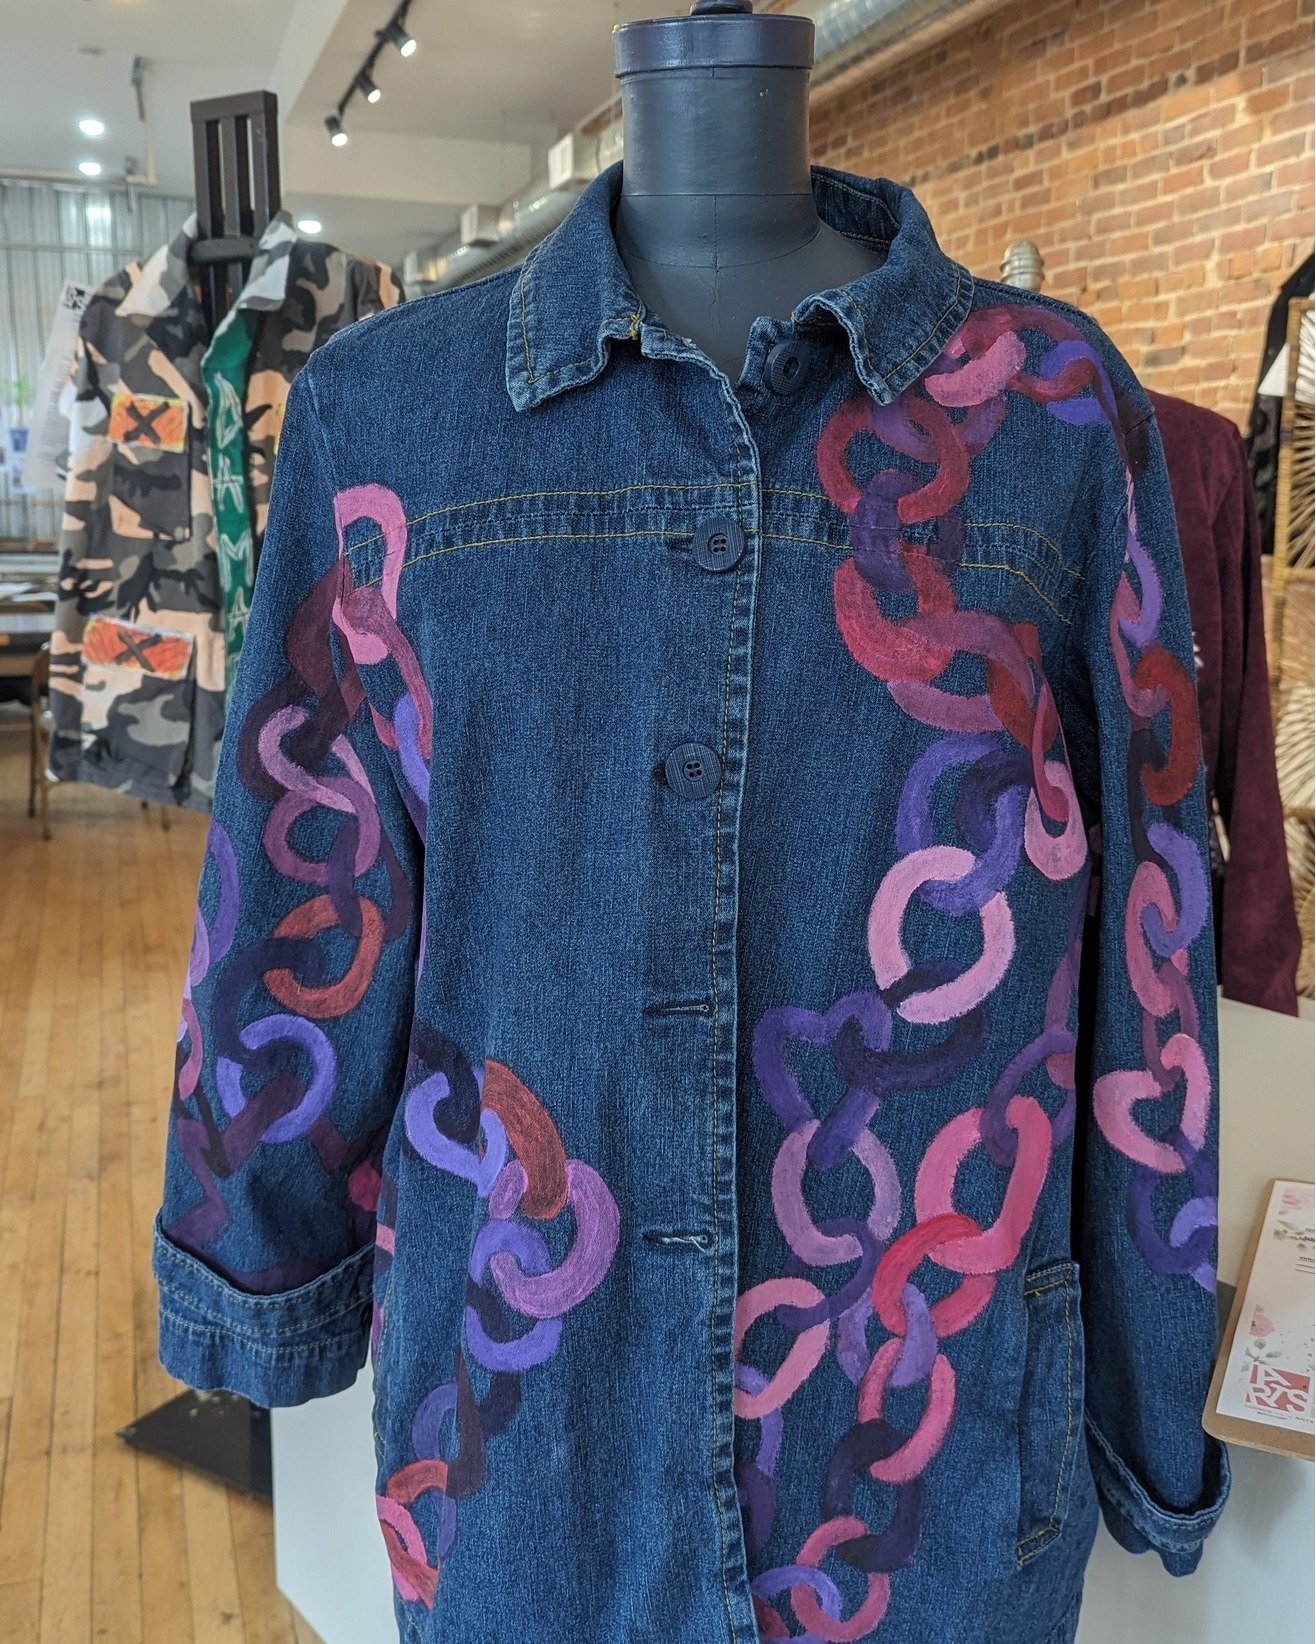 We are both 'Us' &amp; 'Them' by Donna Werling
At the last Jacket Auction there was a bidding war for her coat...
We will start with silent auction bids &amp; then live auction this coat!
Get your tickets now!
https://www.councilforthearts.net/
Sunda